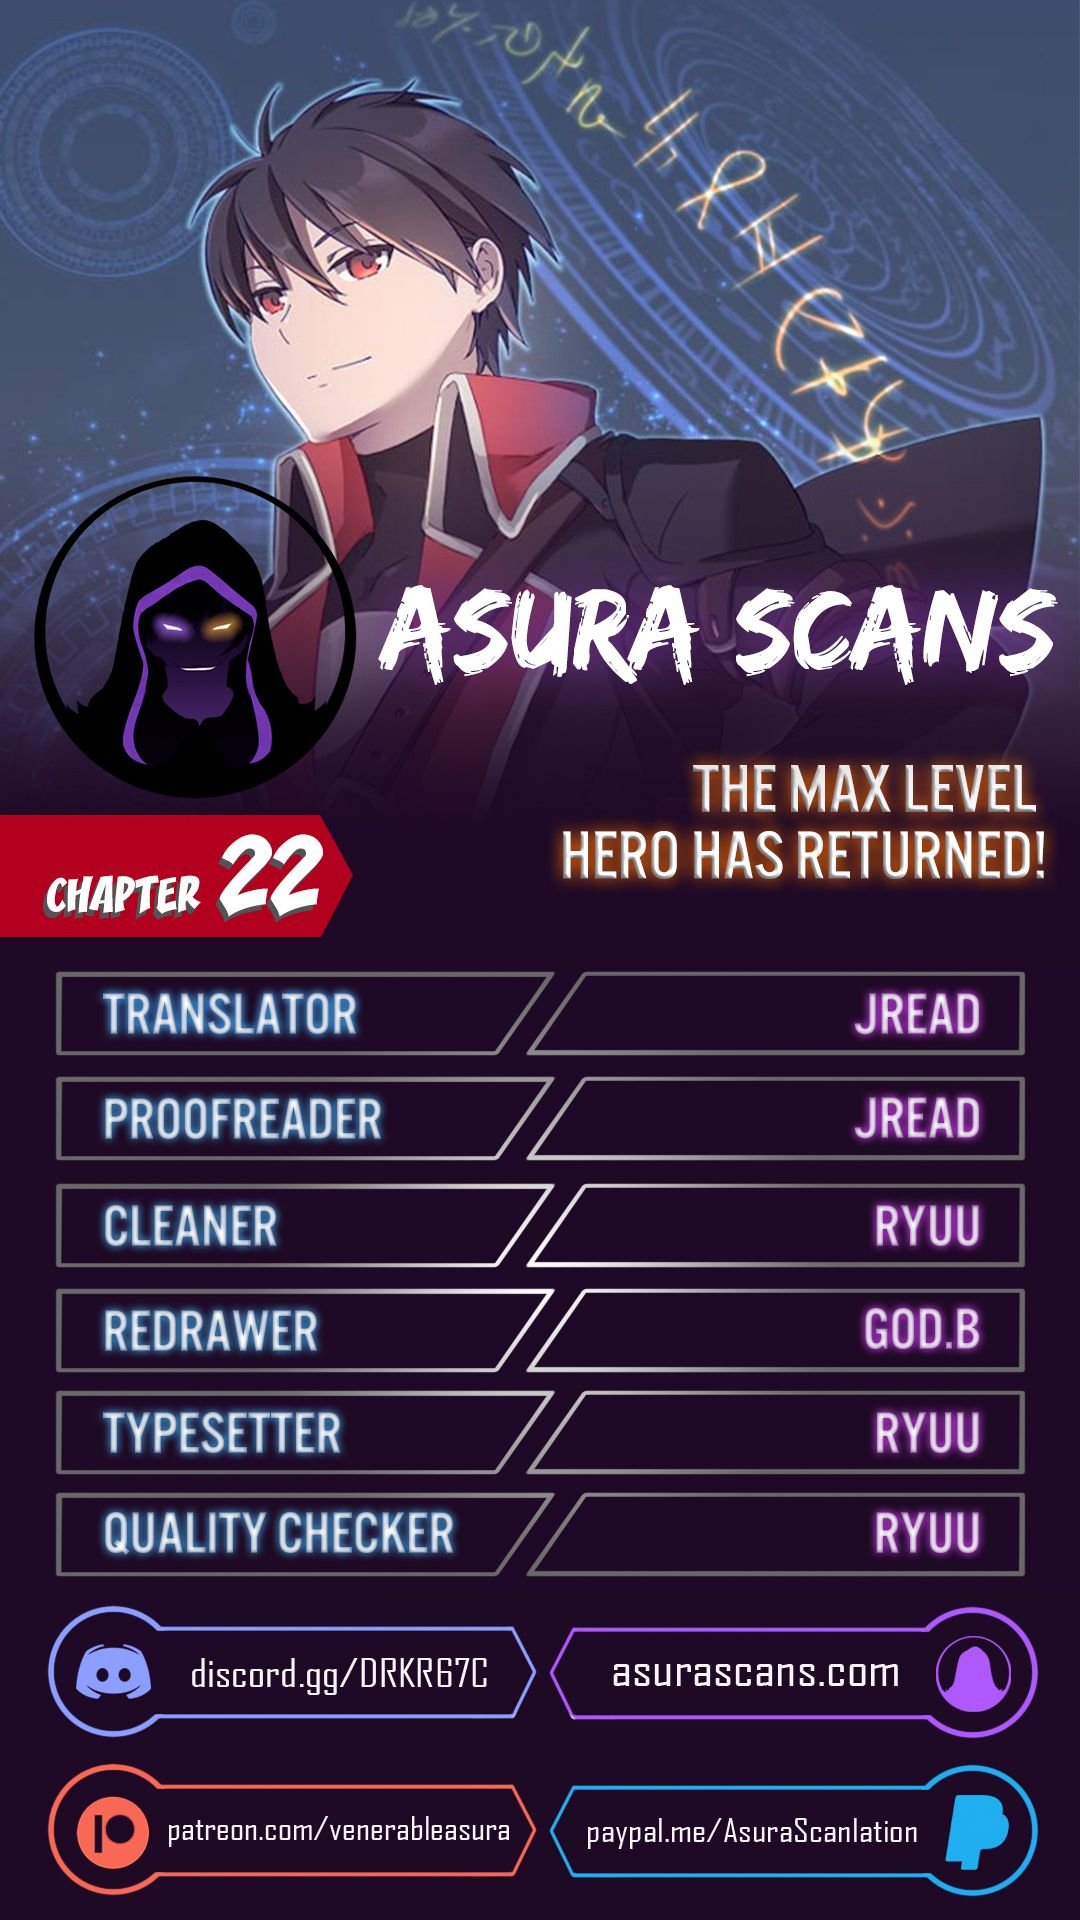 The MAX leveled hero will return! Chapter 22